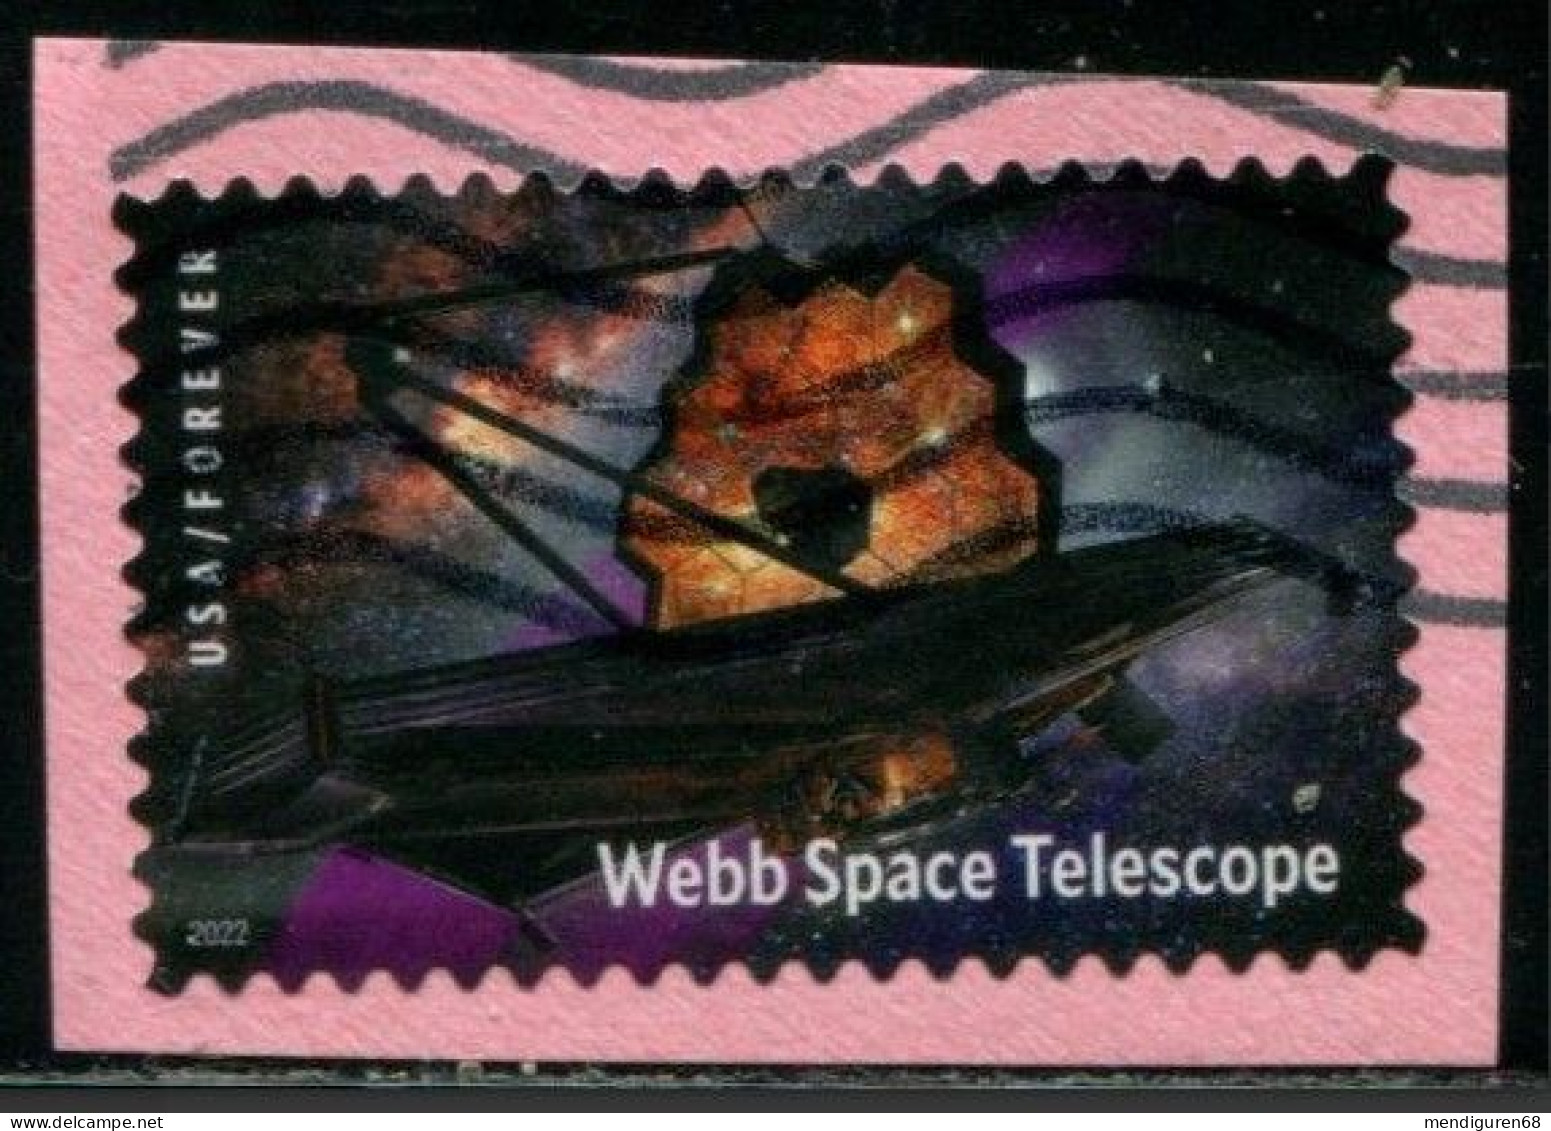 VEREINIGTE STAATEN ETATS UNIS USA 2022 WEBB SPACE TELESCOPE  F USED ON PAPER SN 5720 - Used Stamps